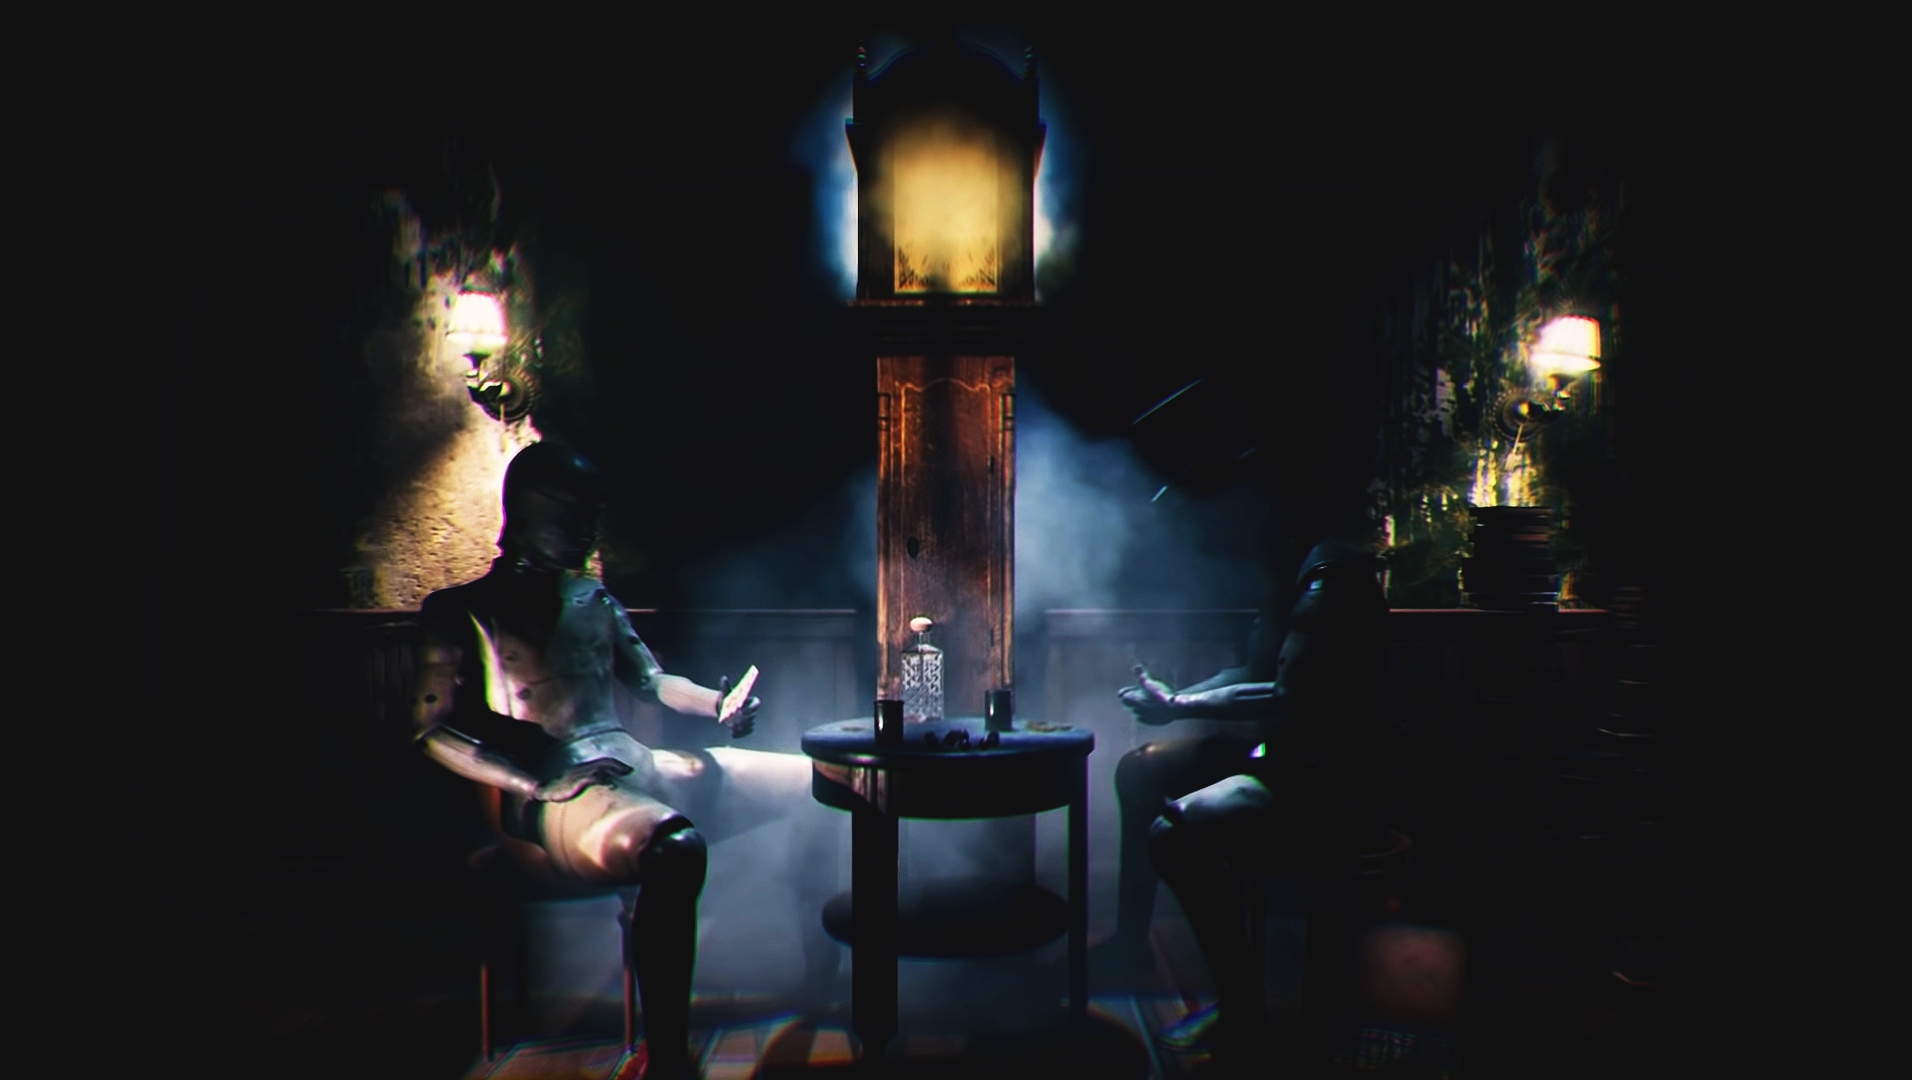 layers of fear 2 story explained